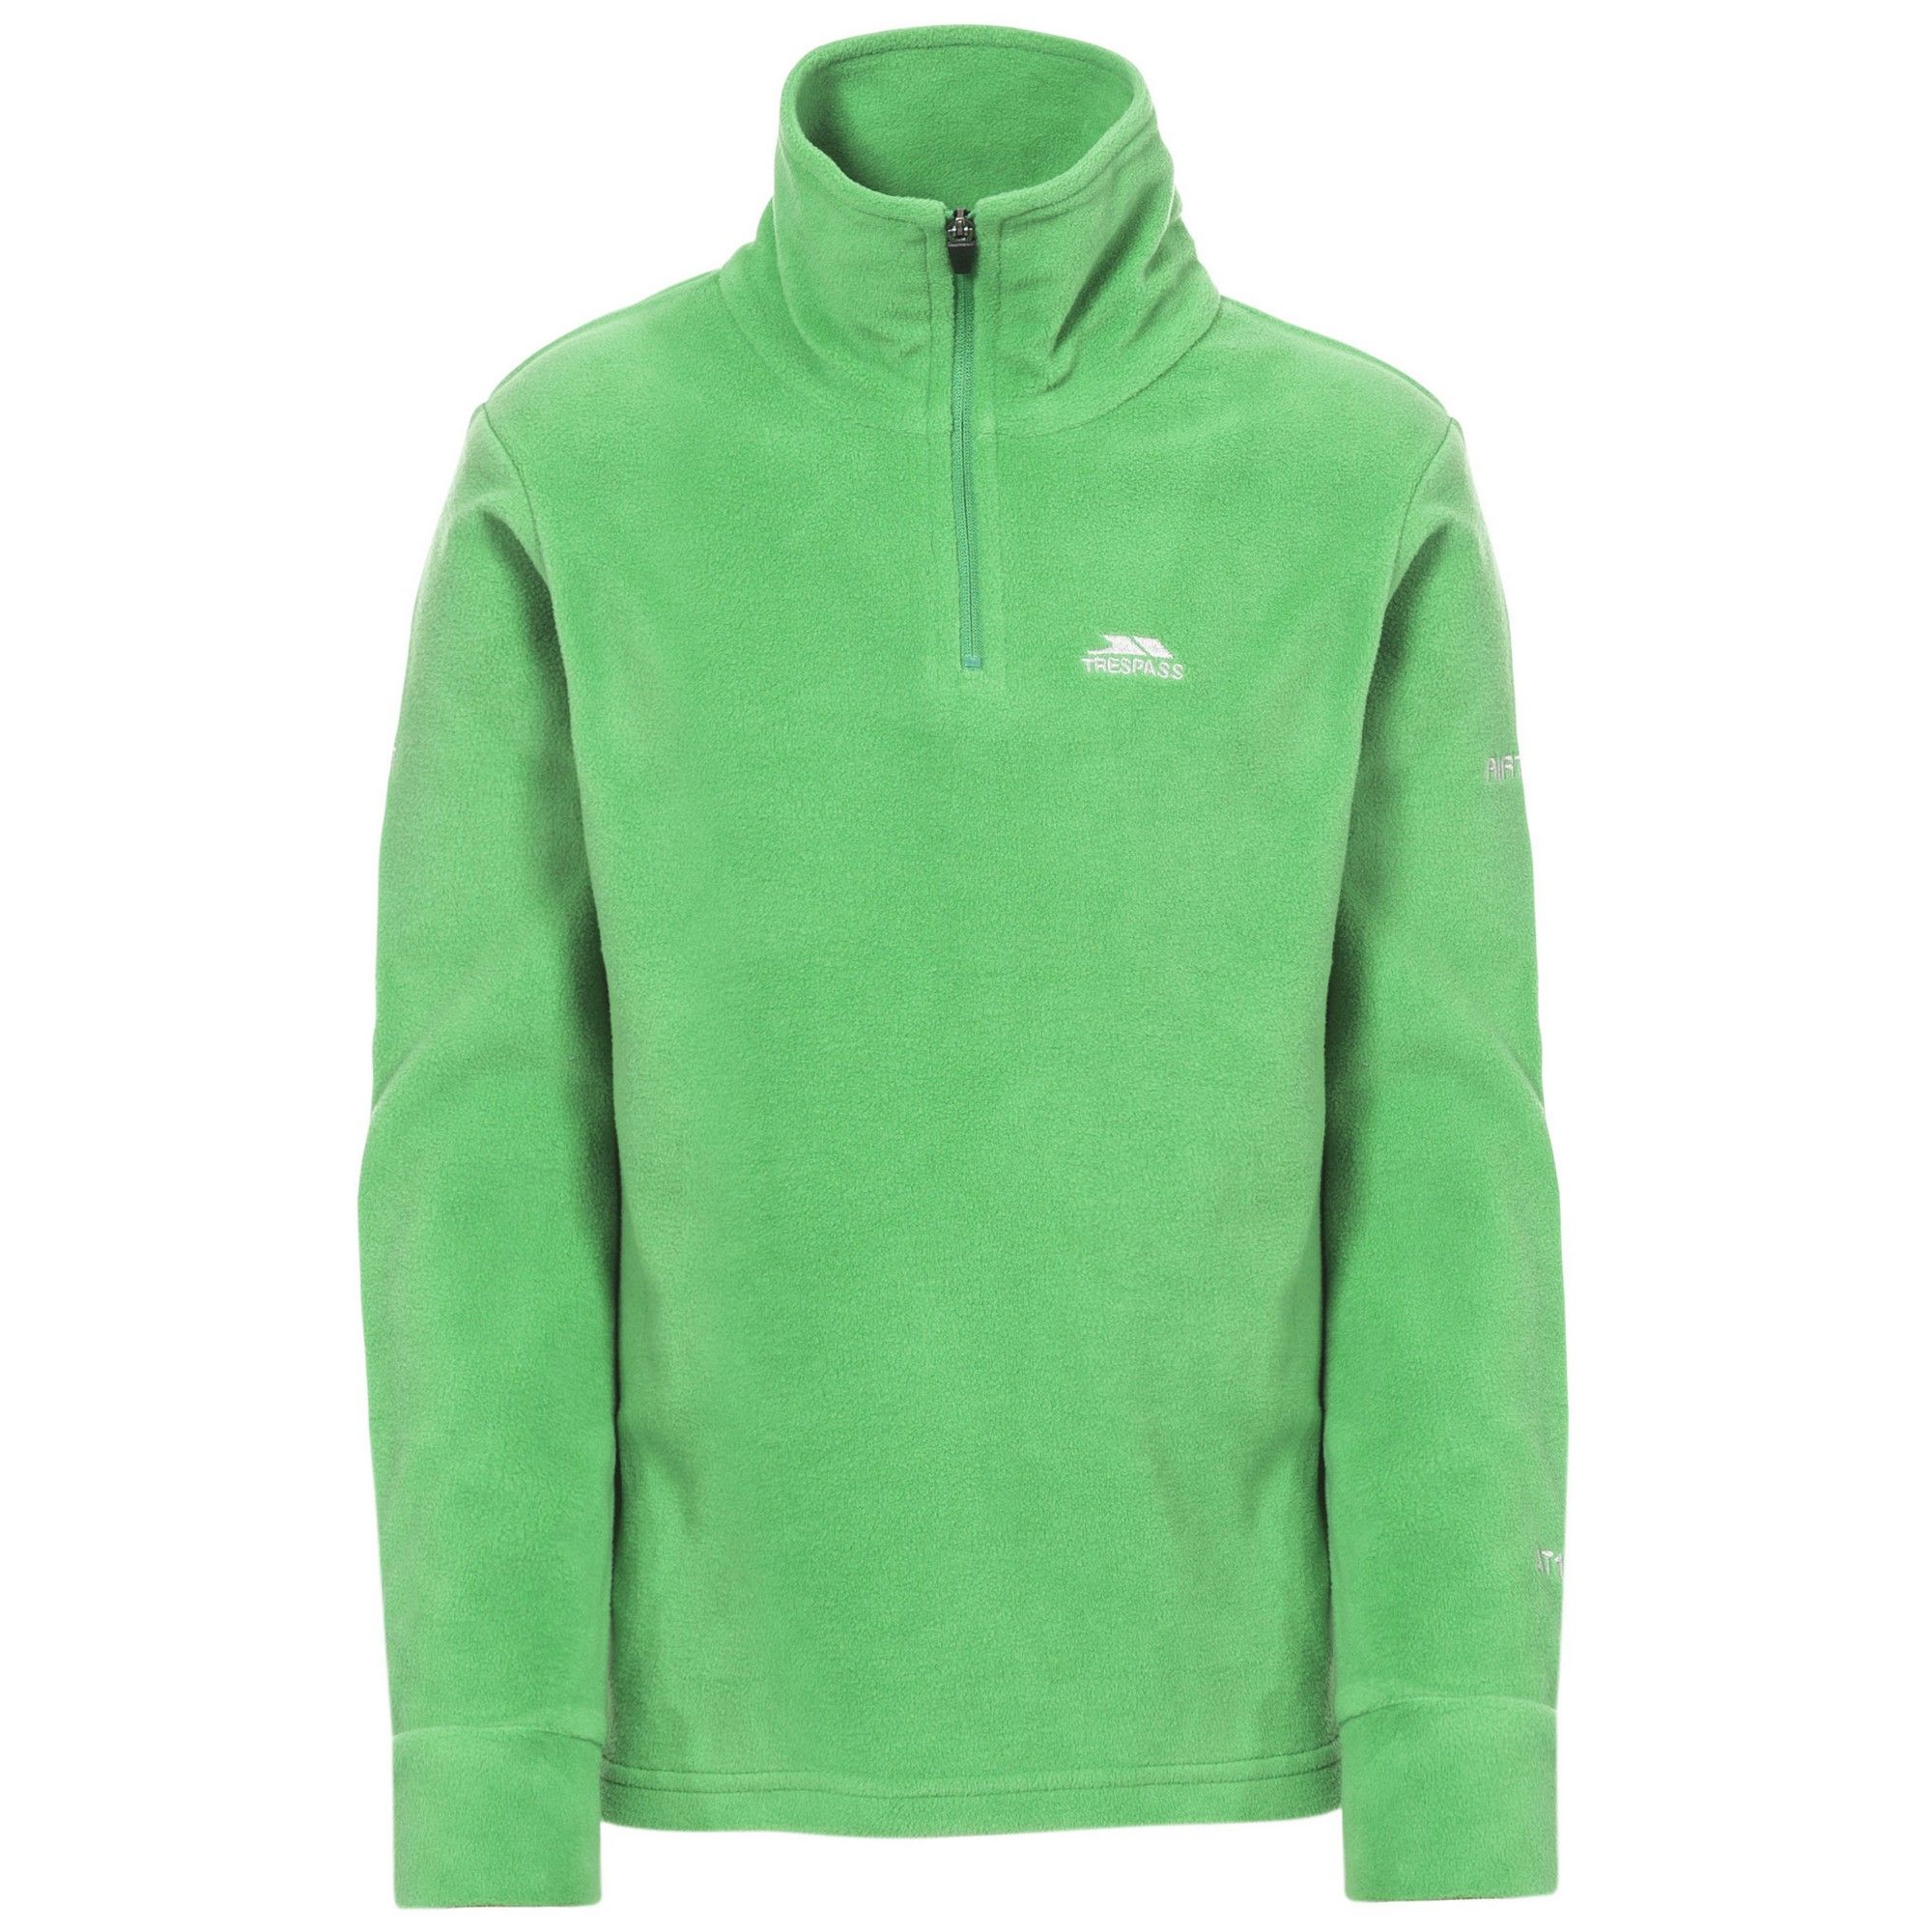 Childrens microfleece top. 130gsm Airtrap fleece build to trap and hold onto body heat. 1/2 zip neck. 100% Polyester Microfleece.